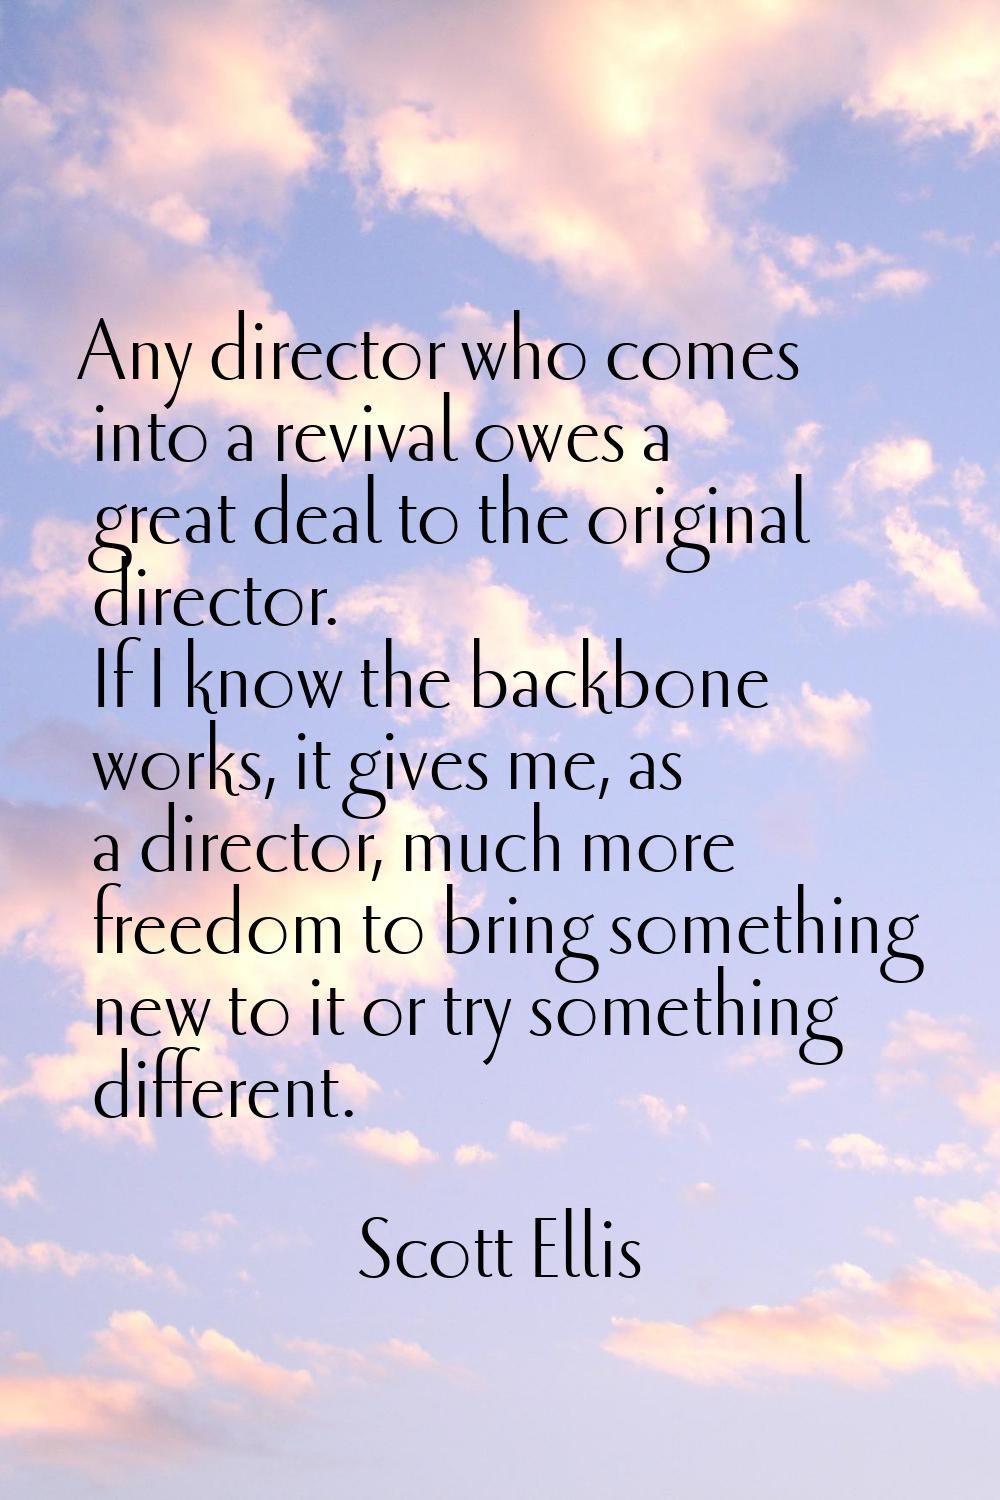 Any director who comes into a revival owes a great deal to the original director. If I know the bac